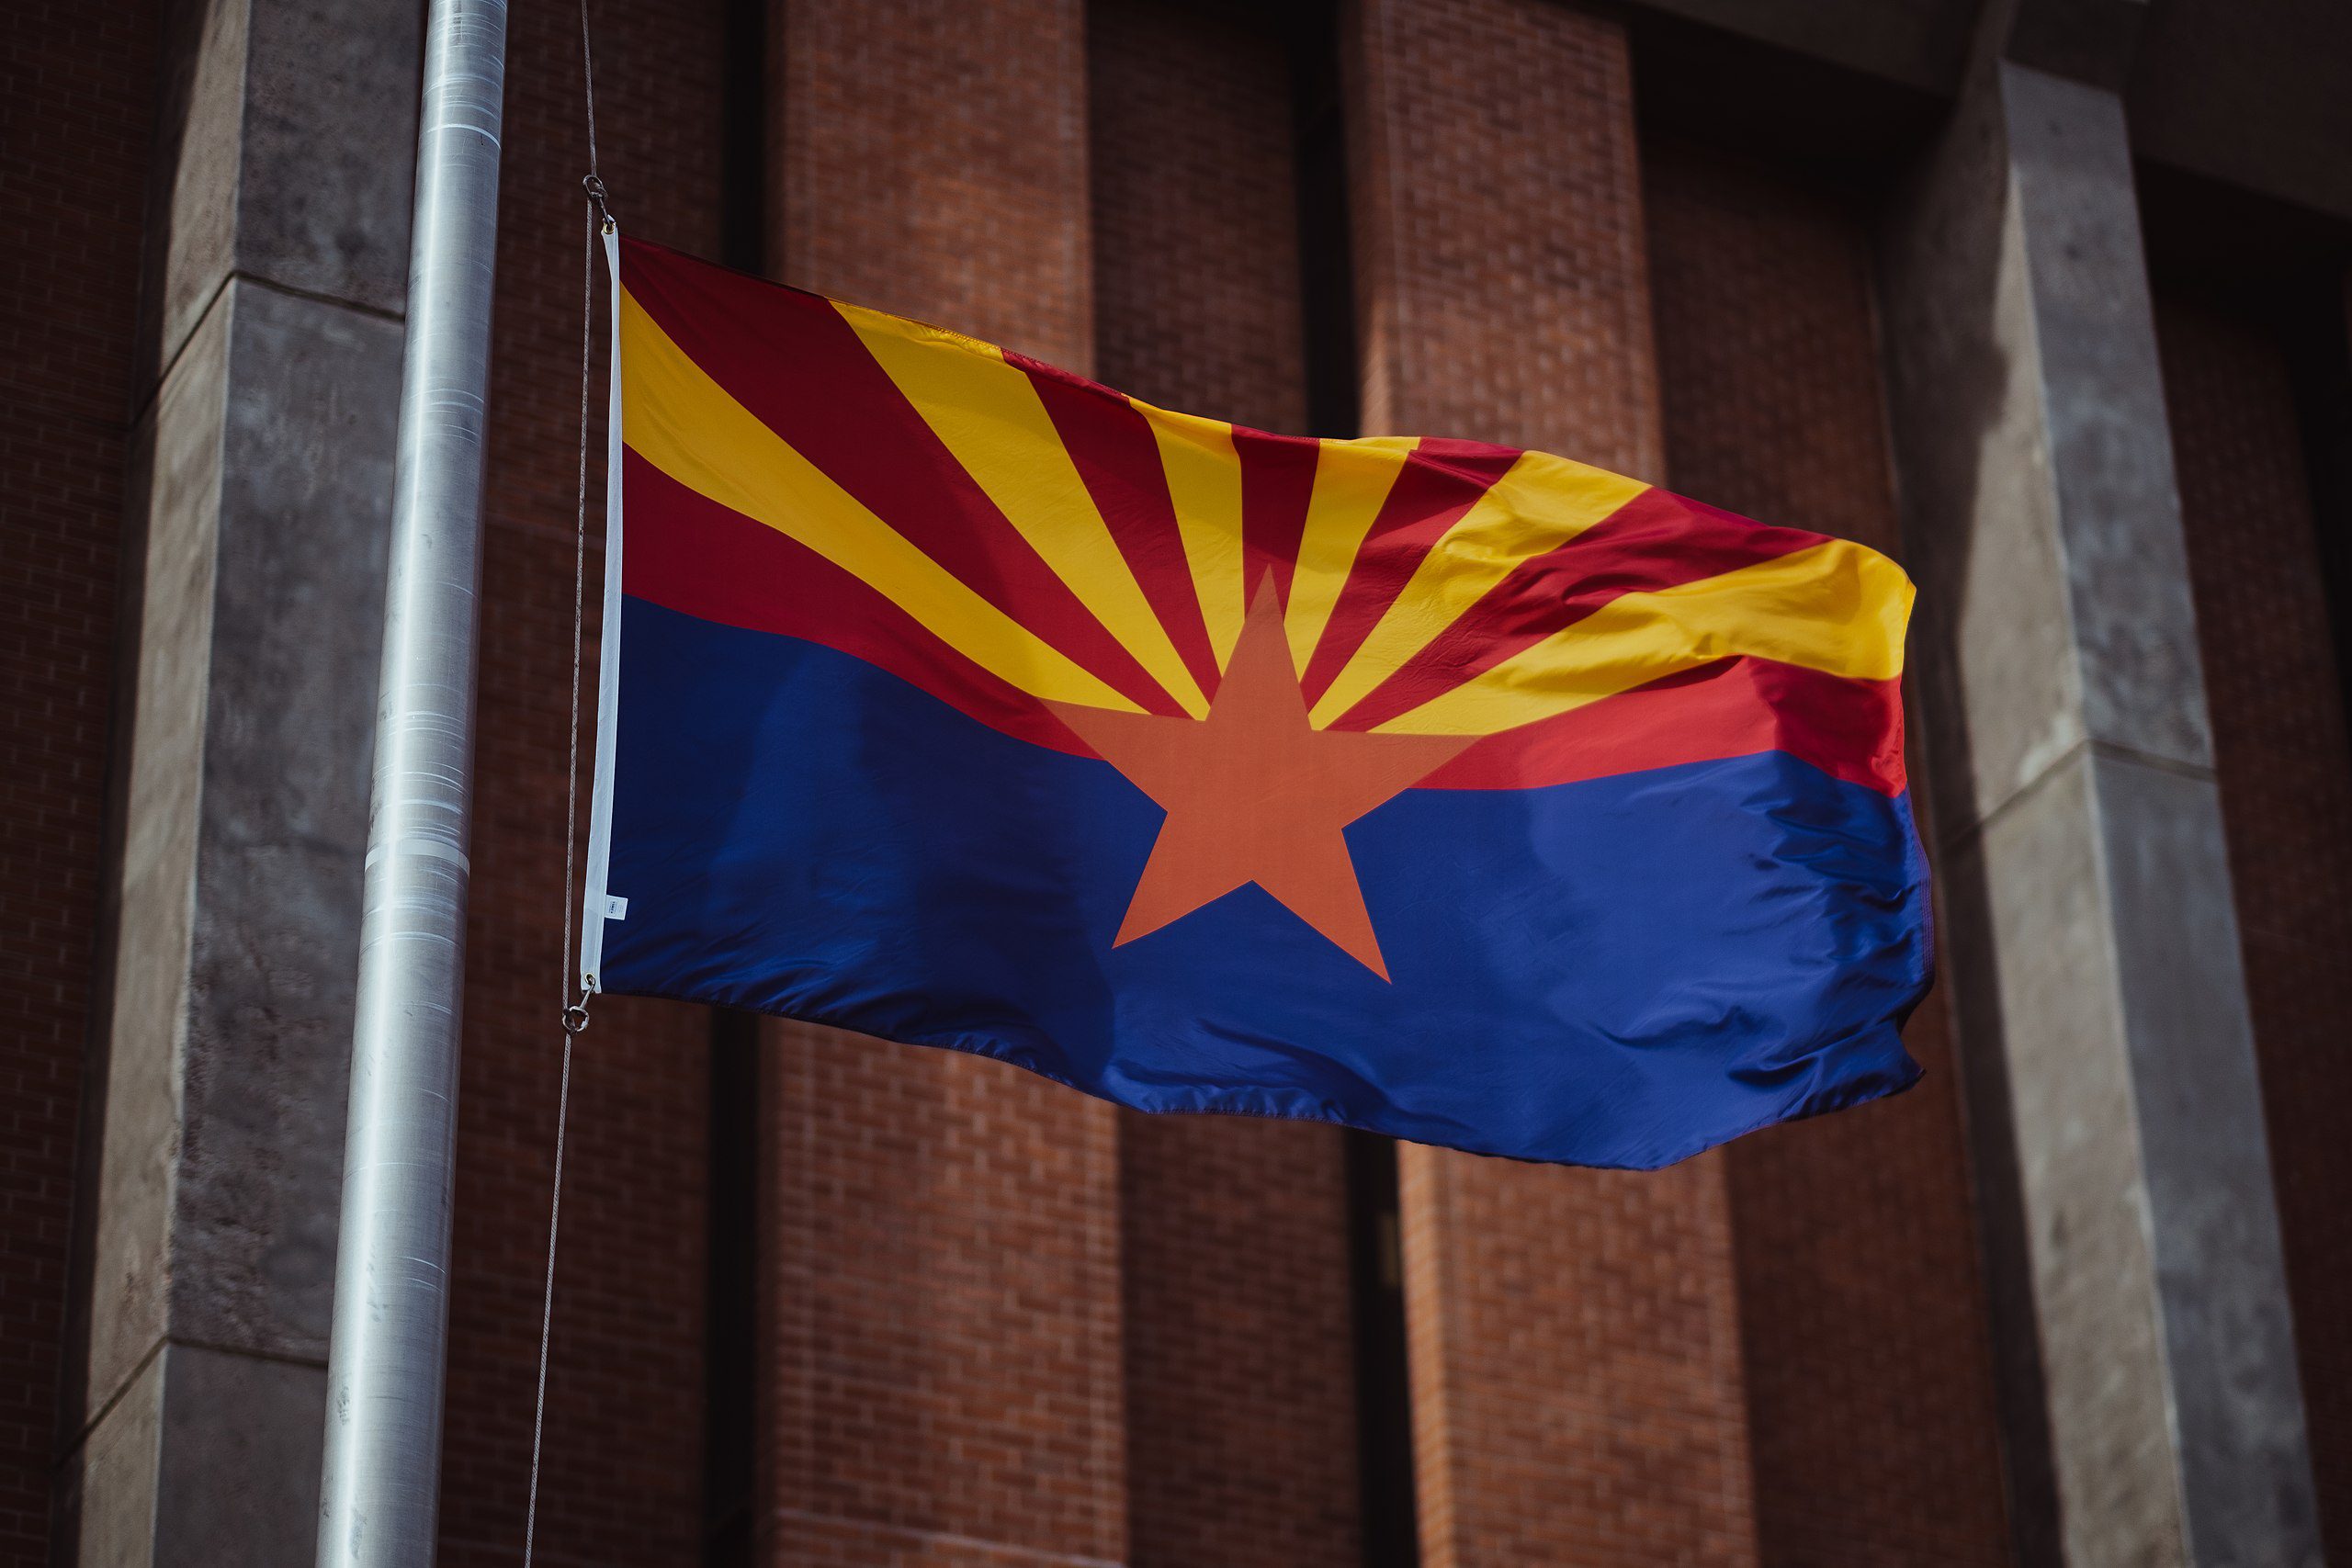 The Arizona State Flag displayed at the Civic Center in Phoenix.